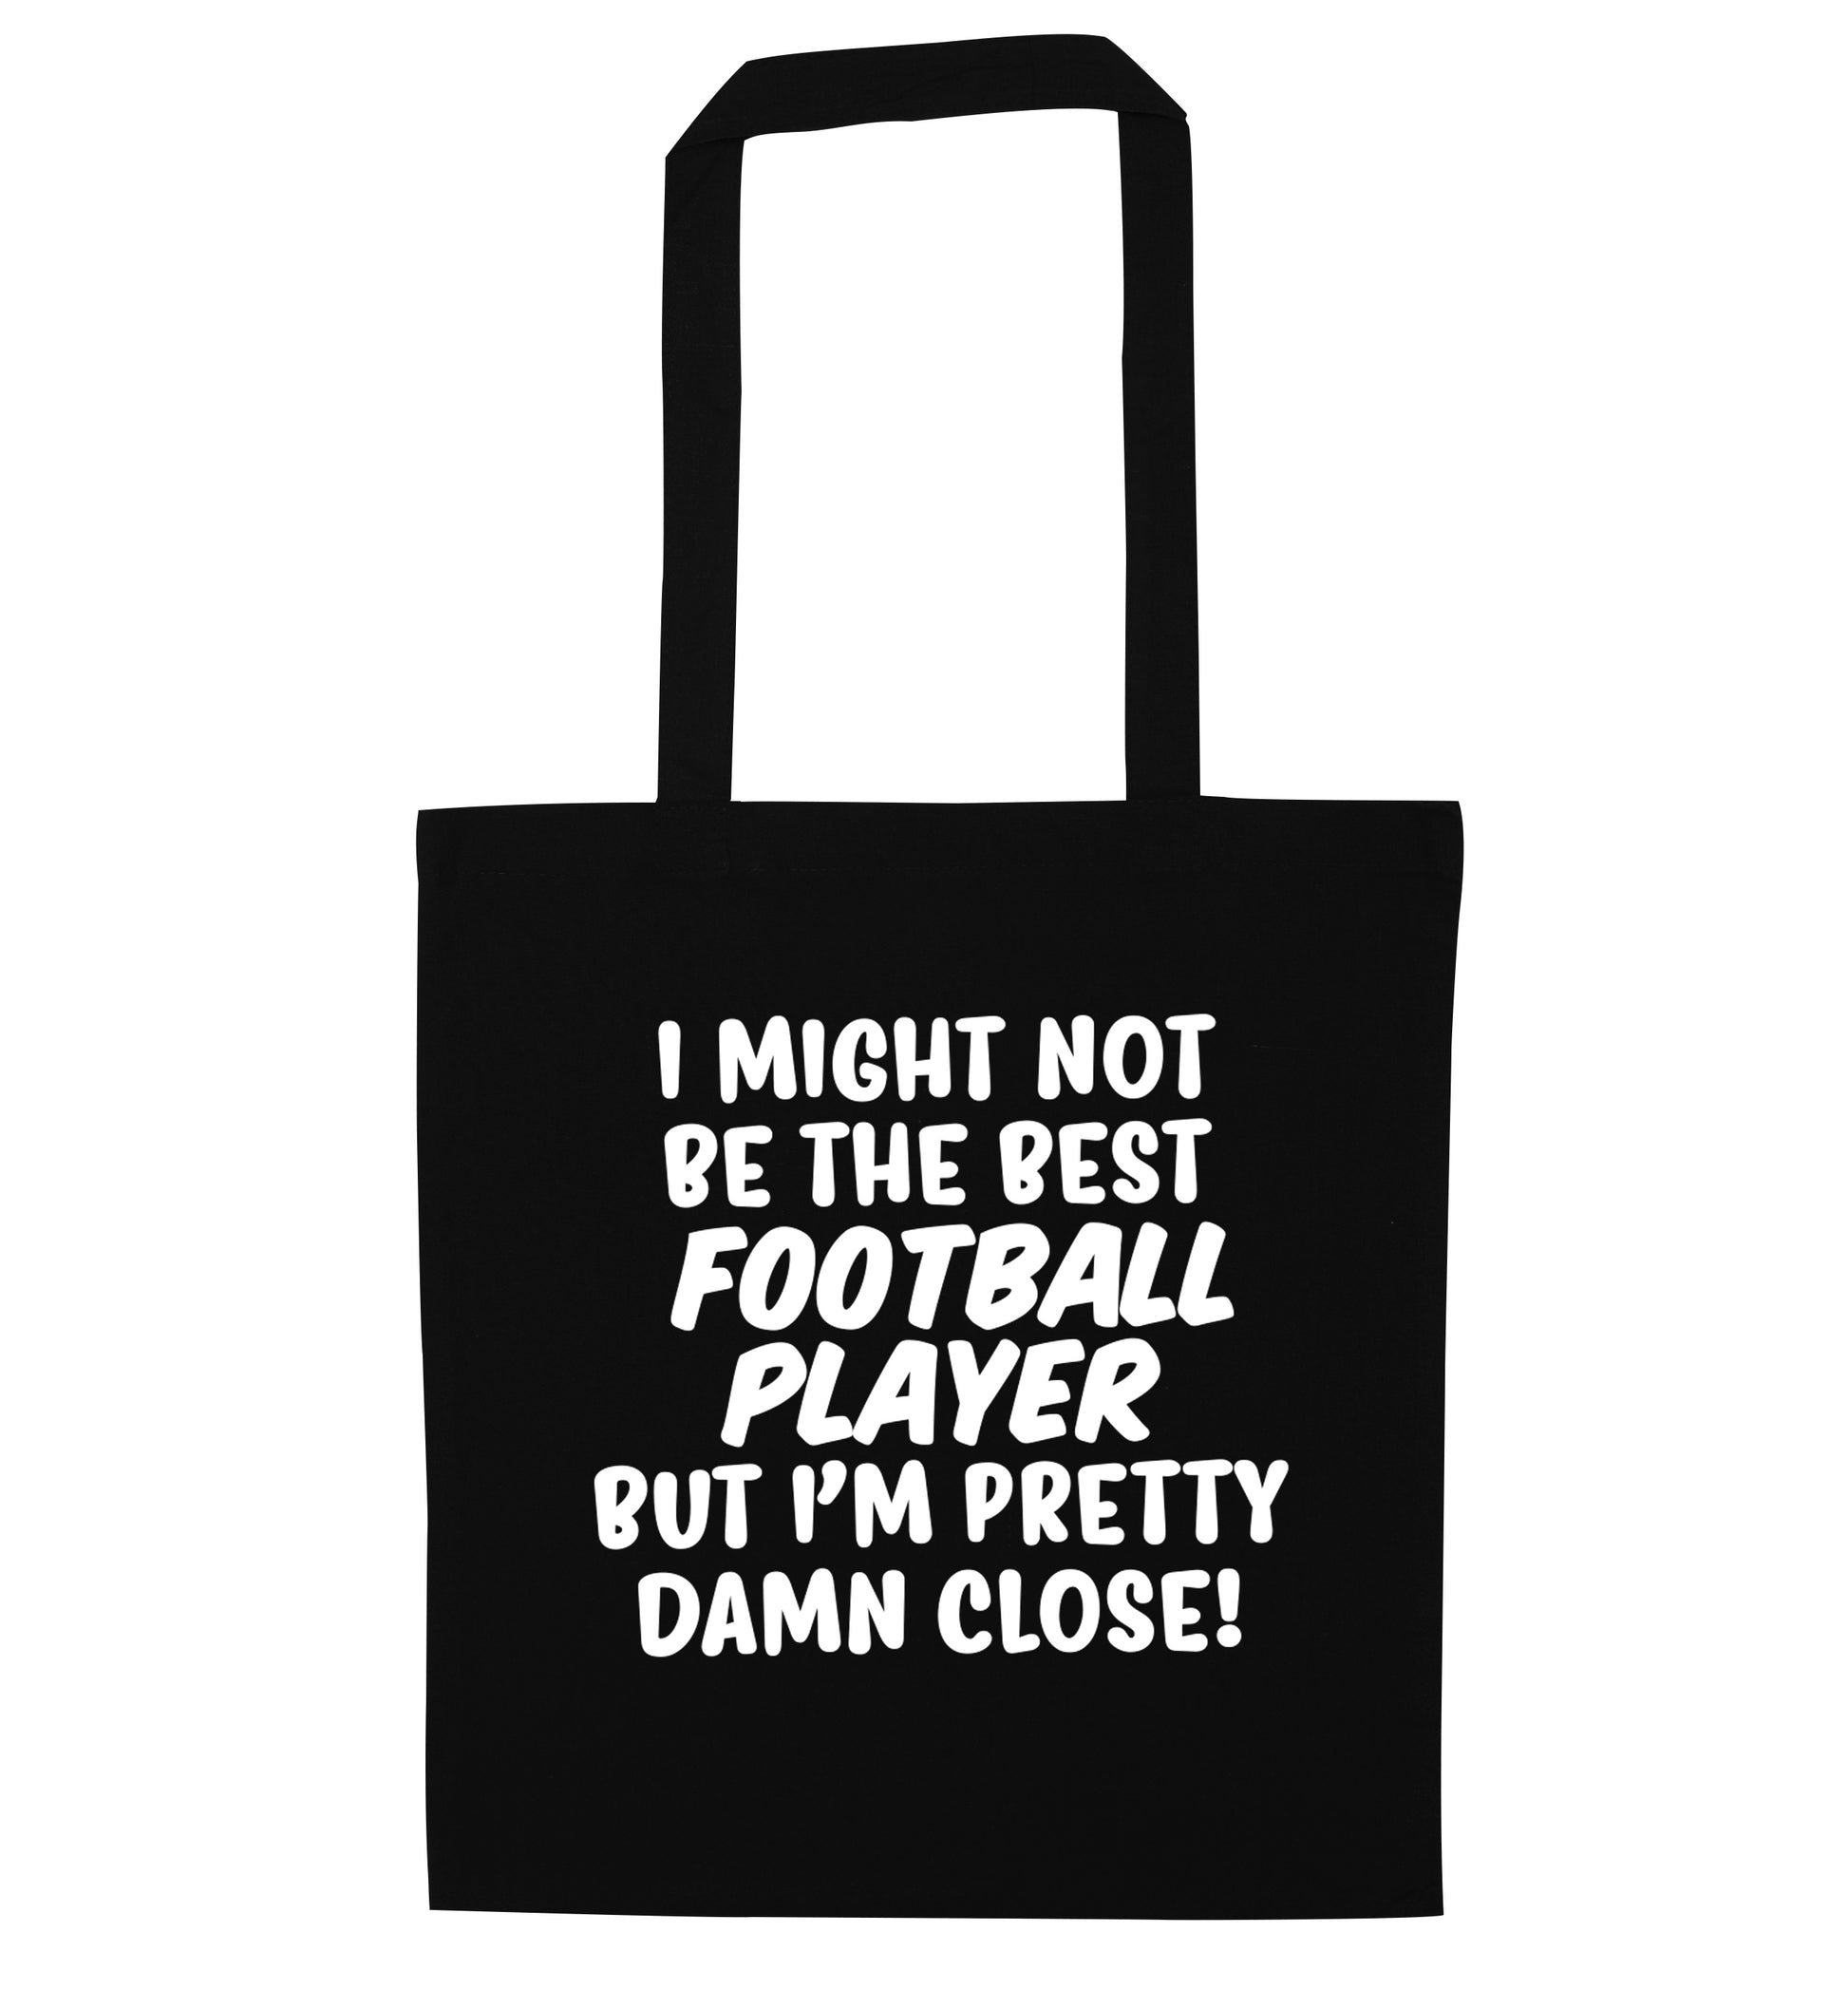 I might not be the best football player but I'm pretty close! black tote bag